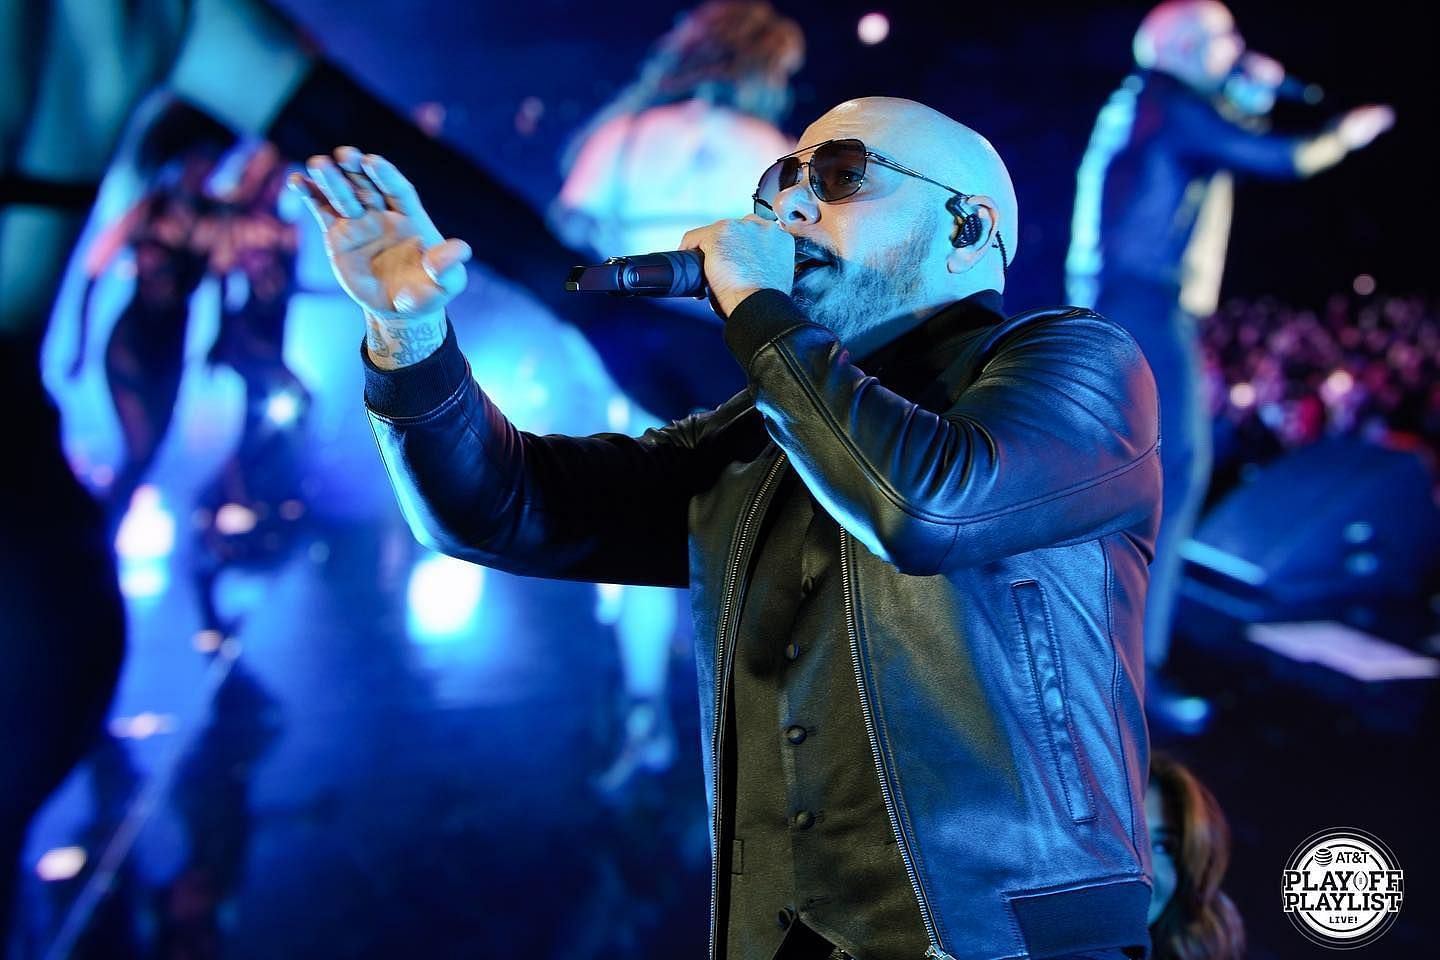 Pitbull's 2023 Tour Cities and Dates